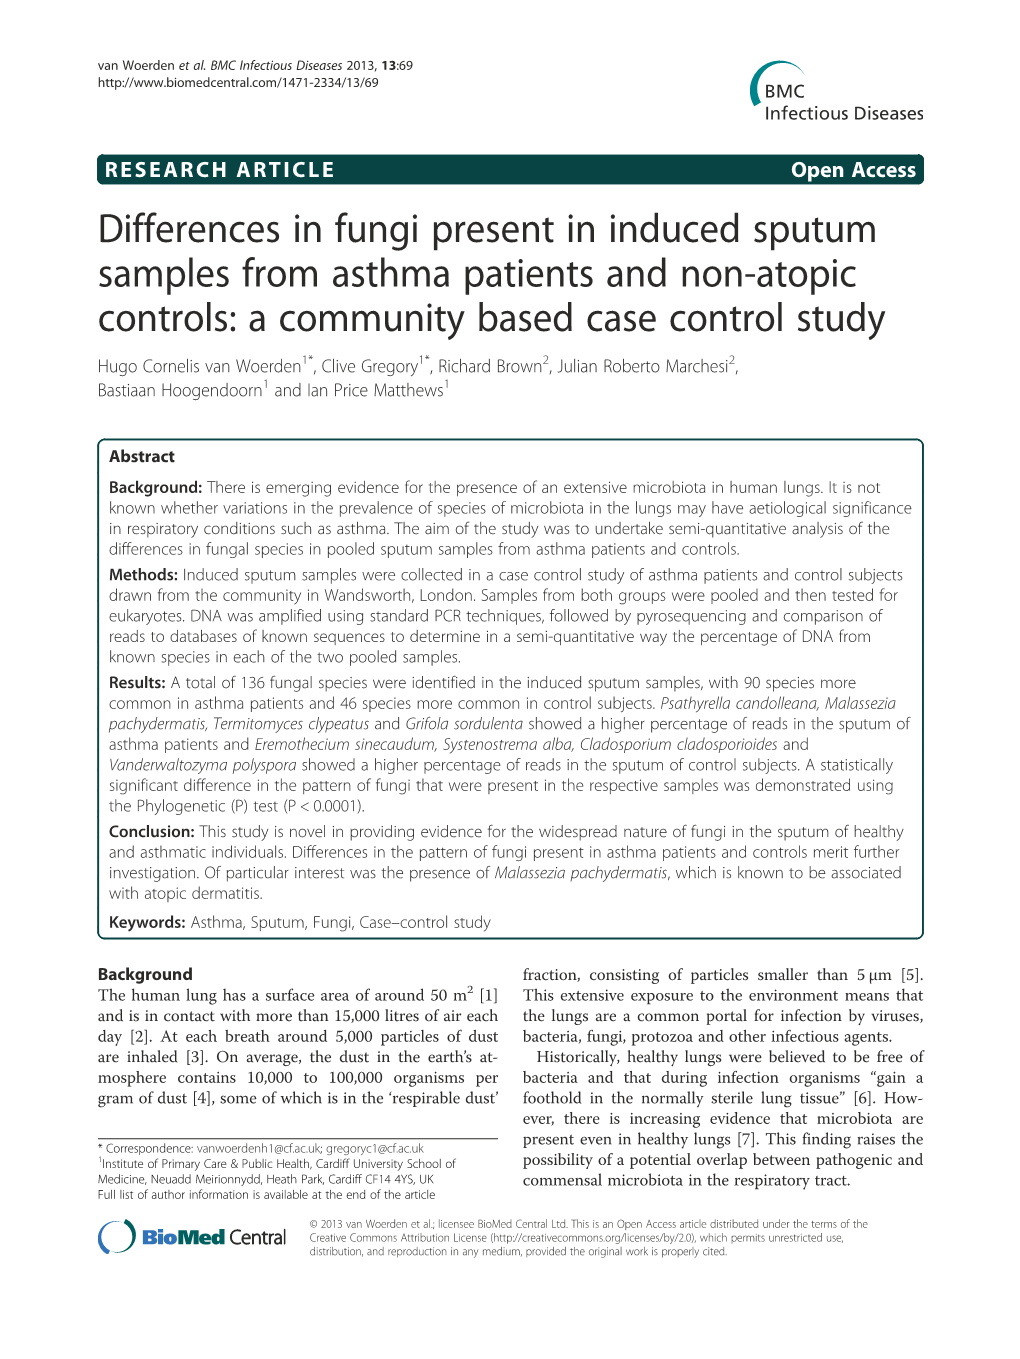 Differences in Fungi Present in Induced Sputum Samples from Asthma